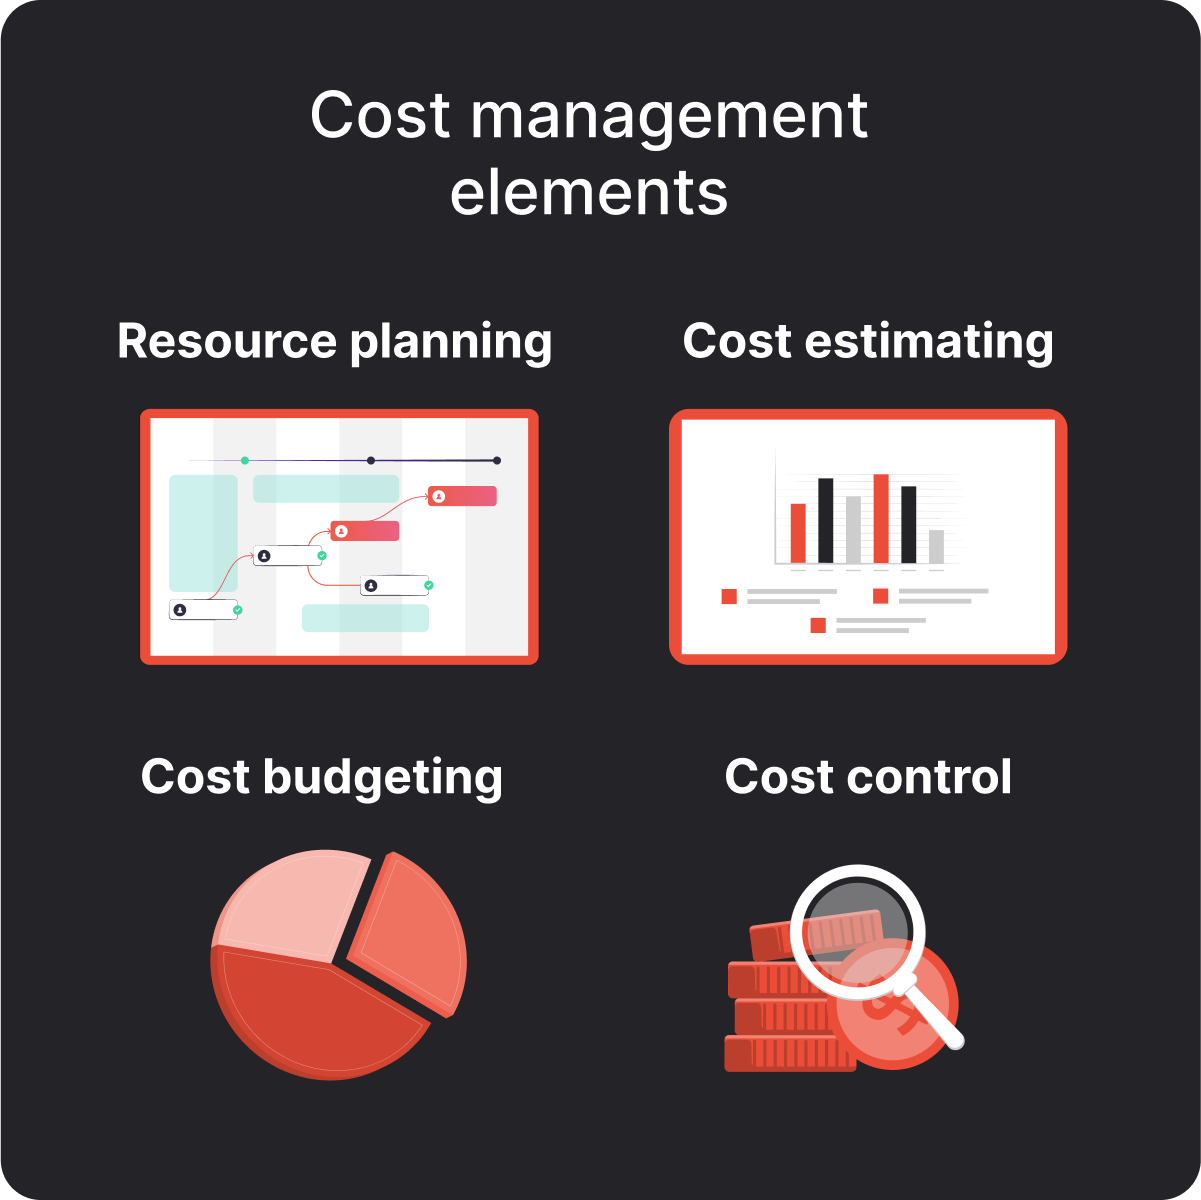 Illustration depicting the 4 elements of cost management